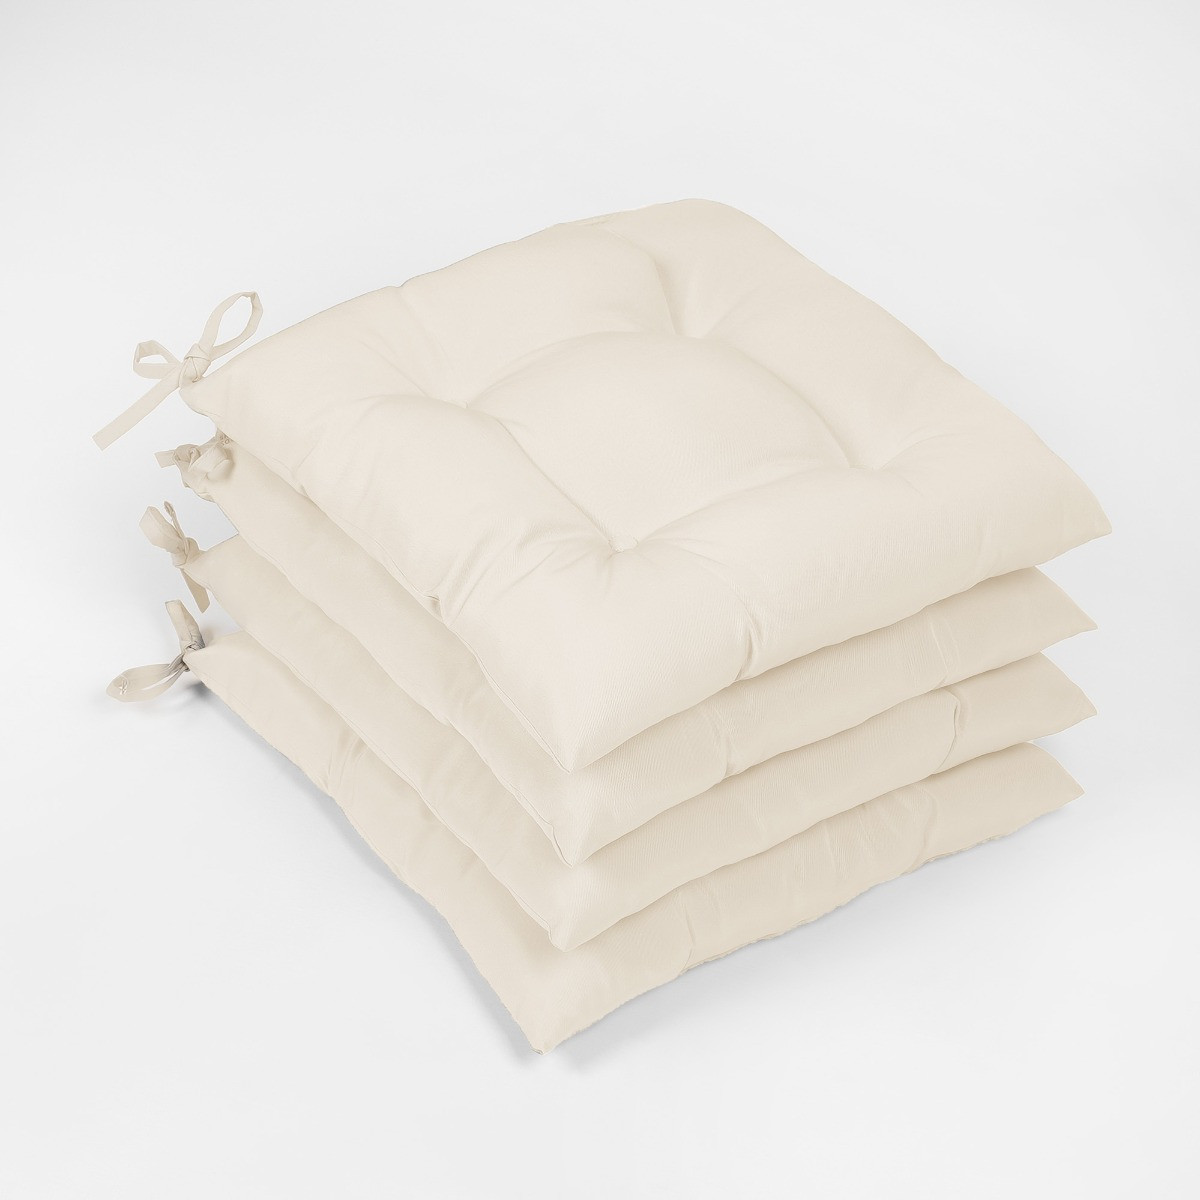 OHS Water Resistant Seat Pads - Cream>